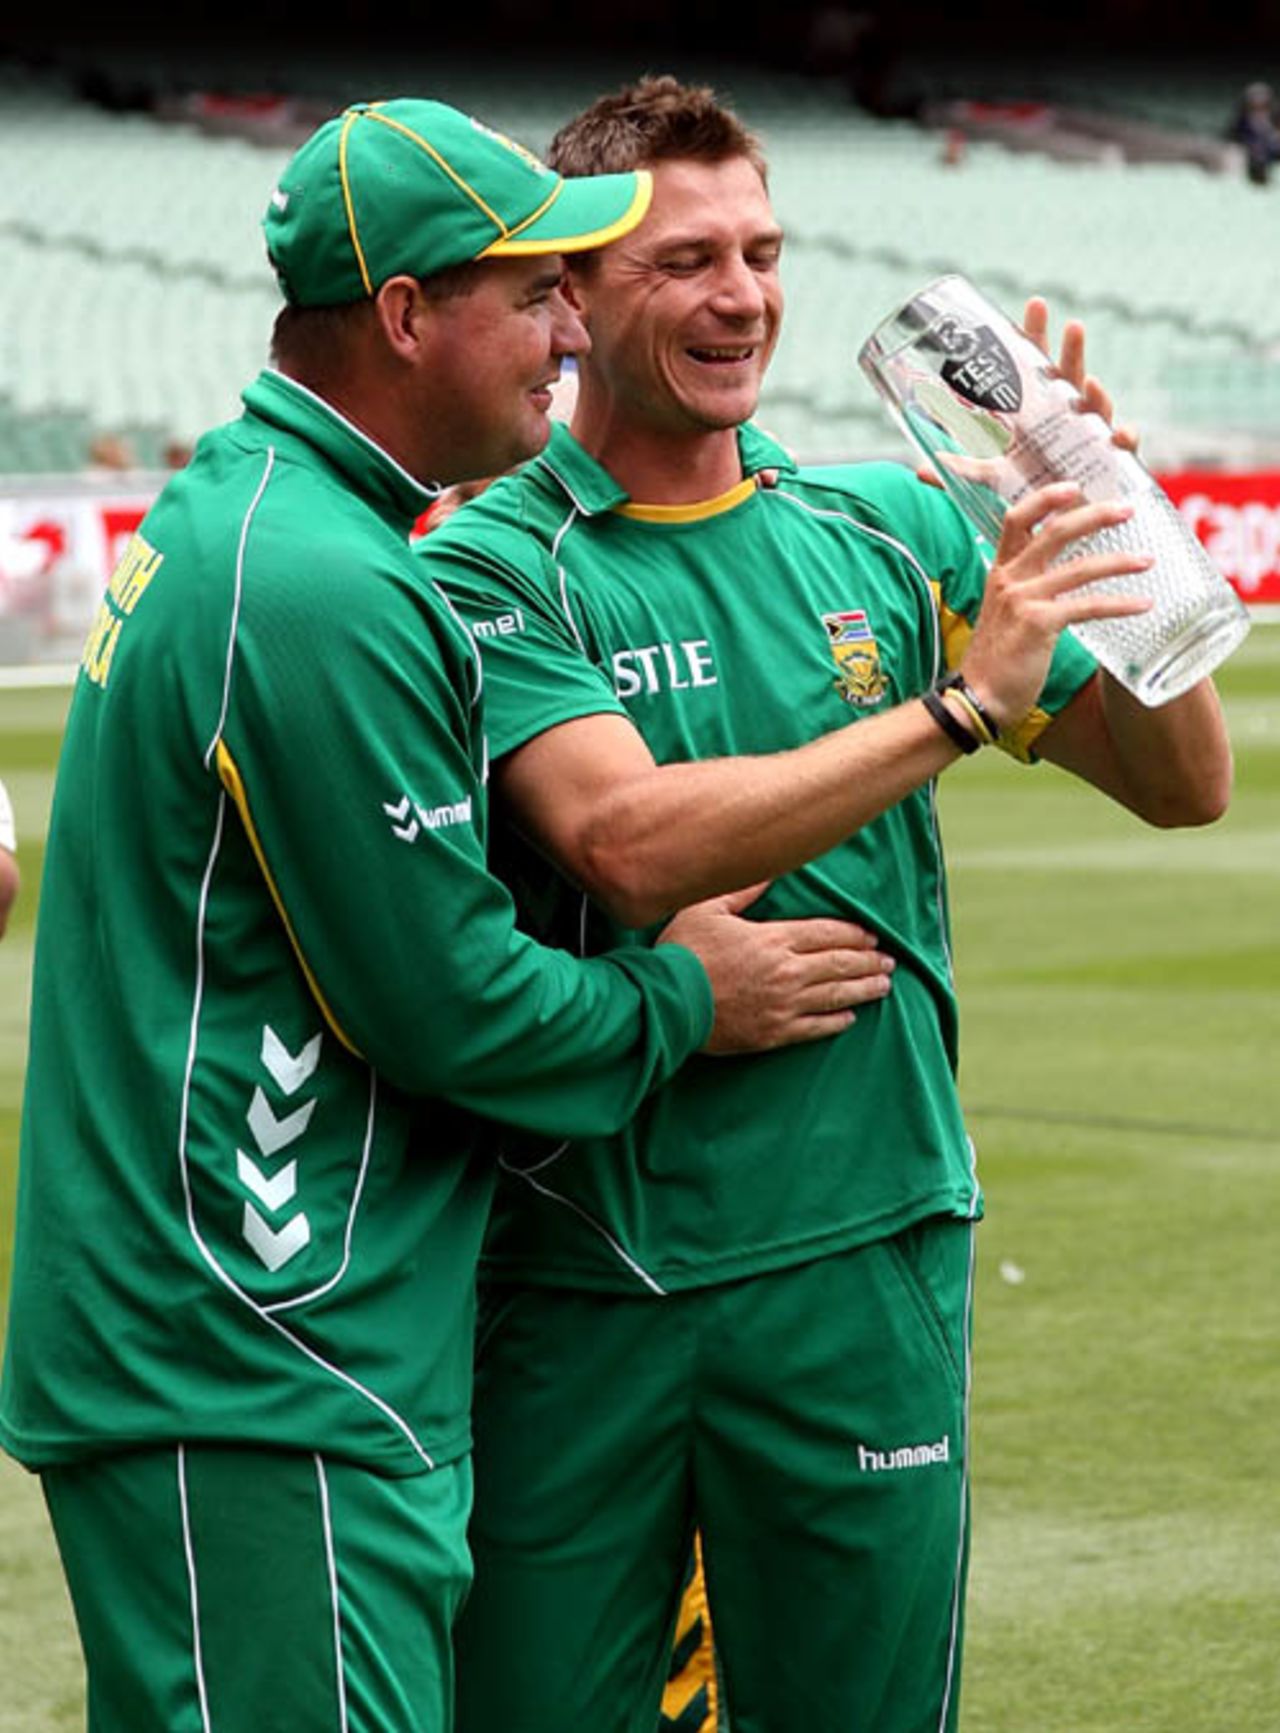 Man of the Match Dale Steyn is congratulated by South Africa coach Mickey Arthur, Australia v South Africa, 2nd Test, Melbourne, 5th day, December 30, 2008
